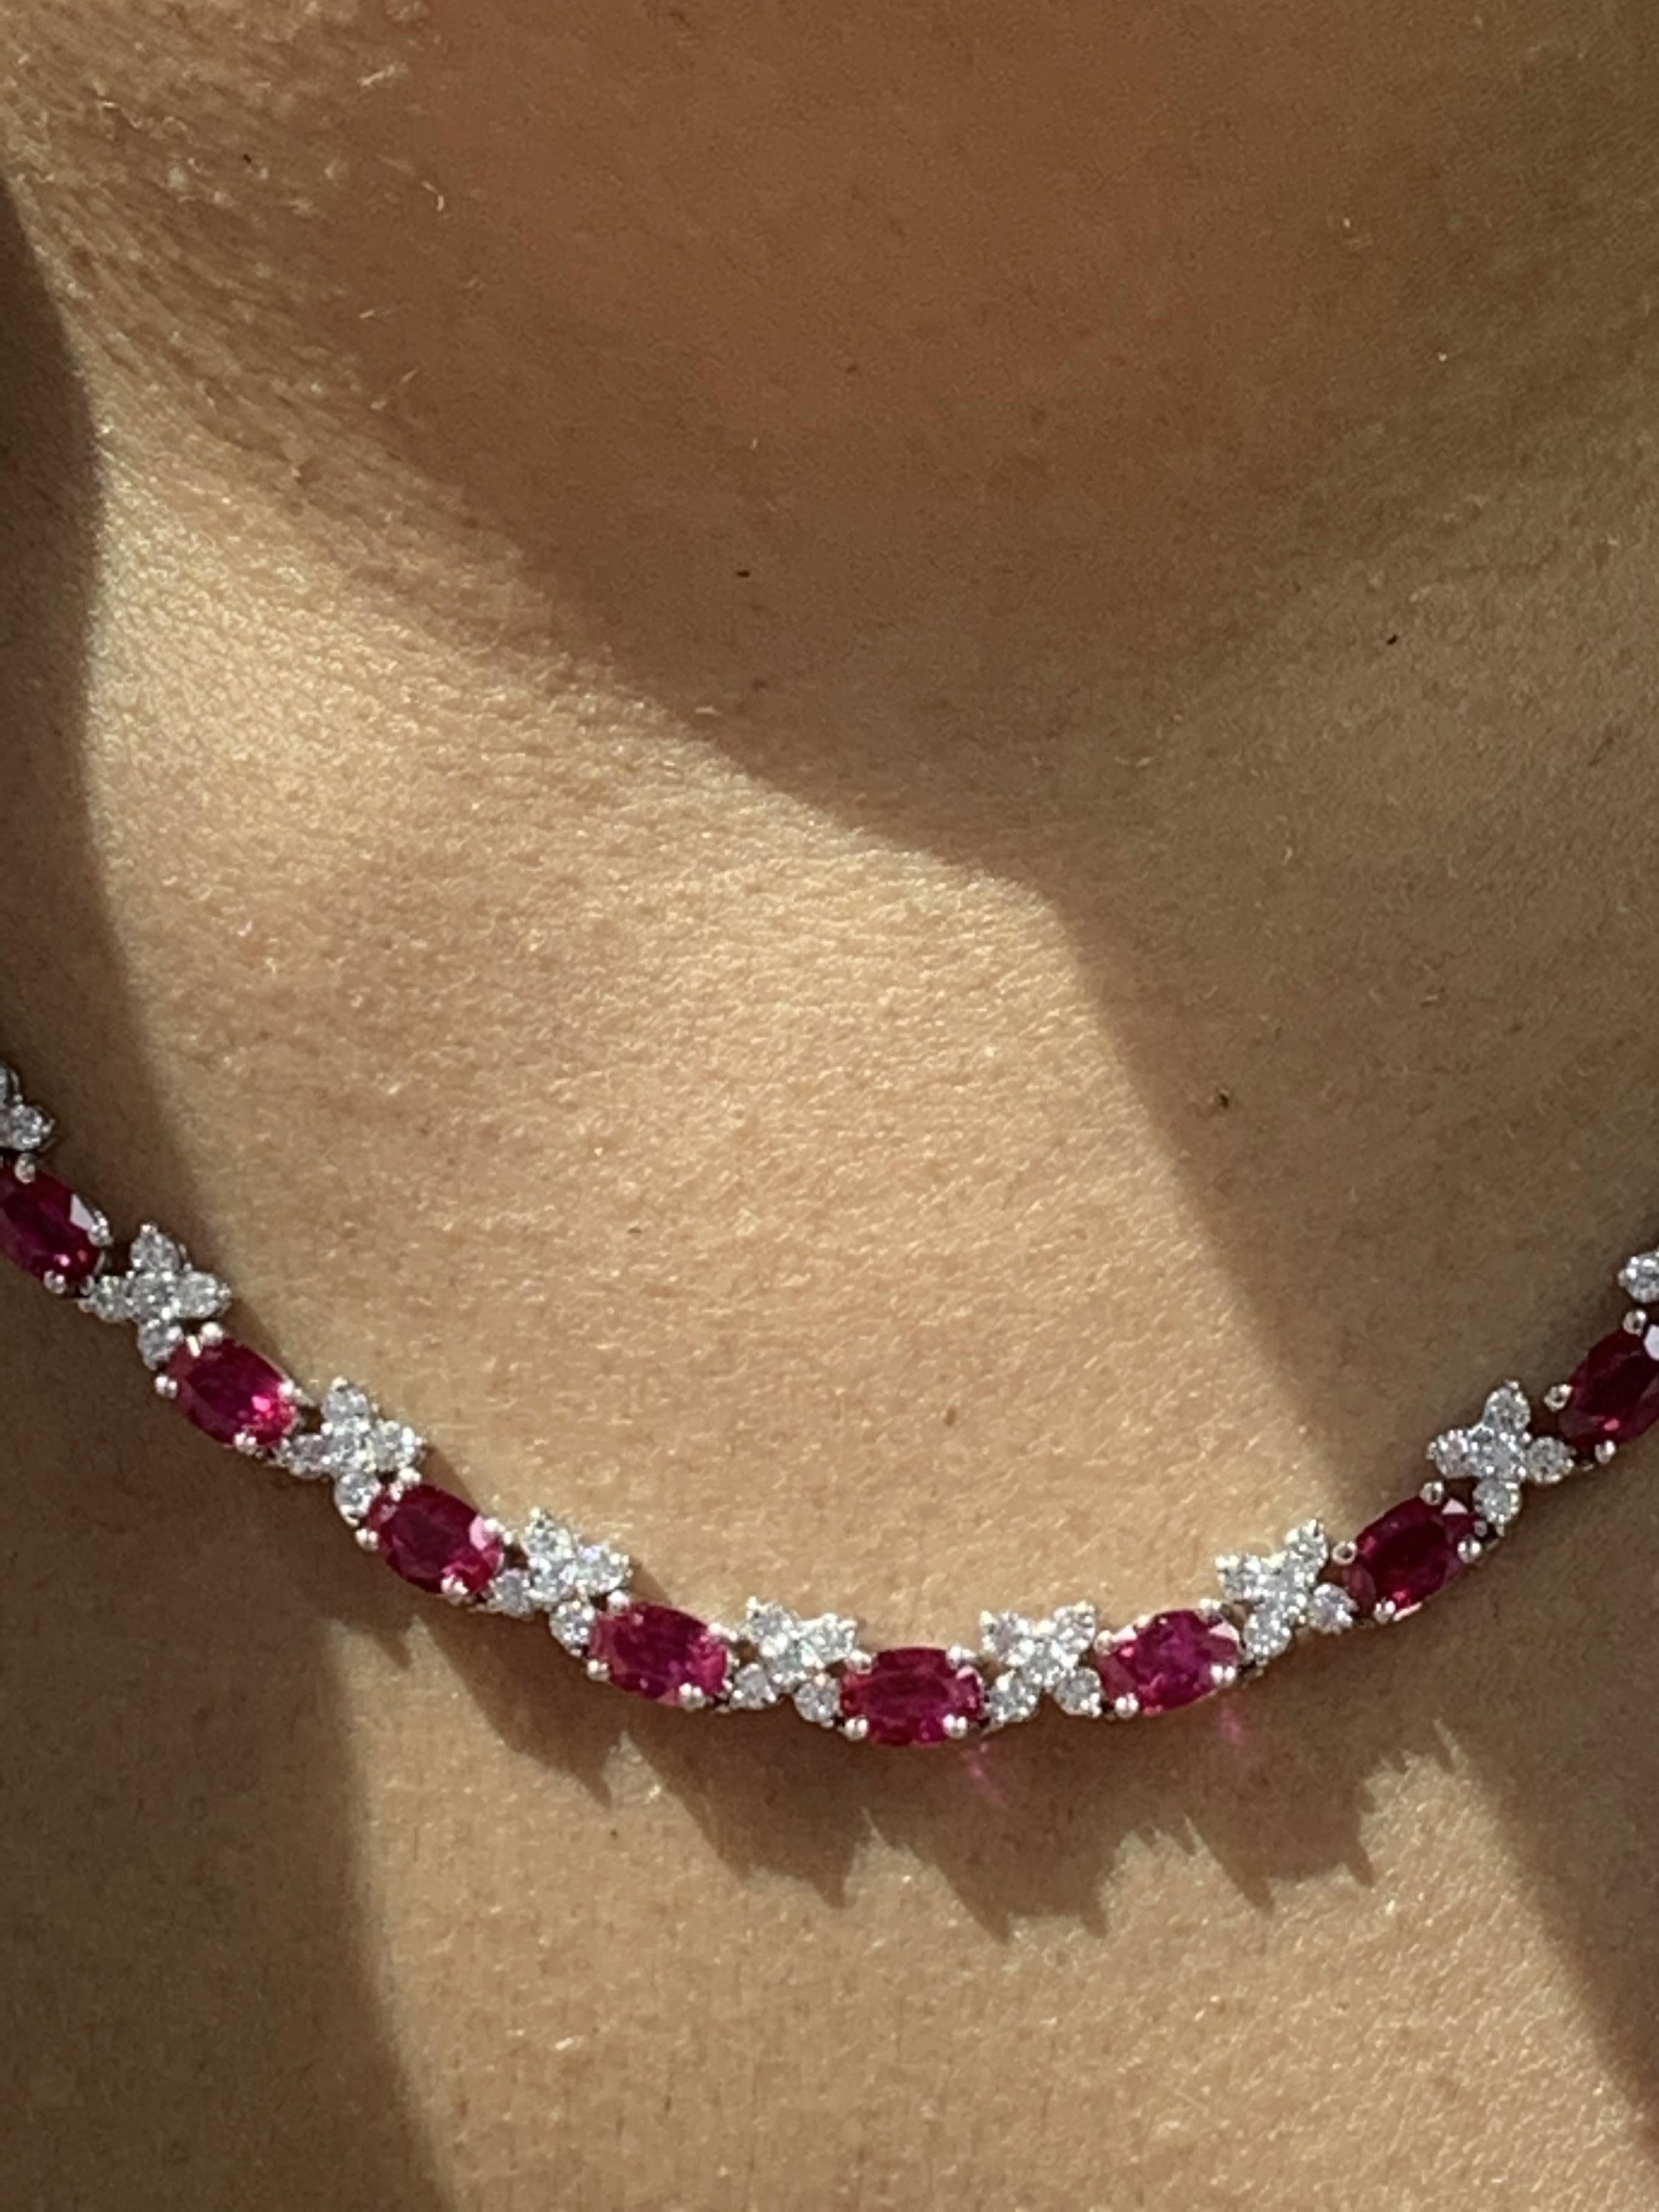 17.68 Carat Oval Cut Ruby and Diamond Tennis Necklace in 14K White Gold 6